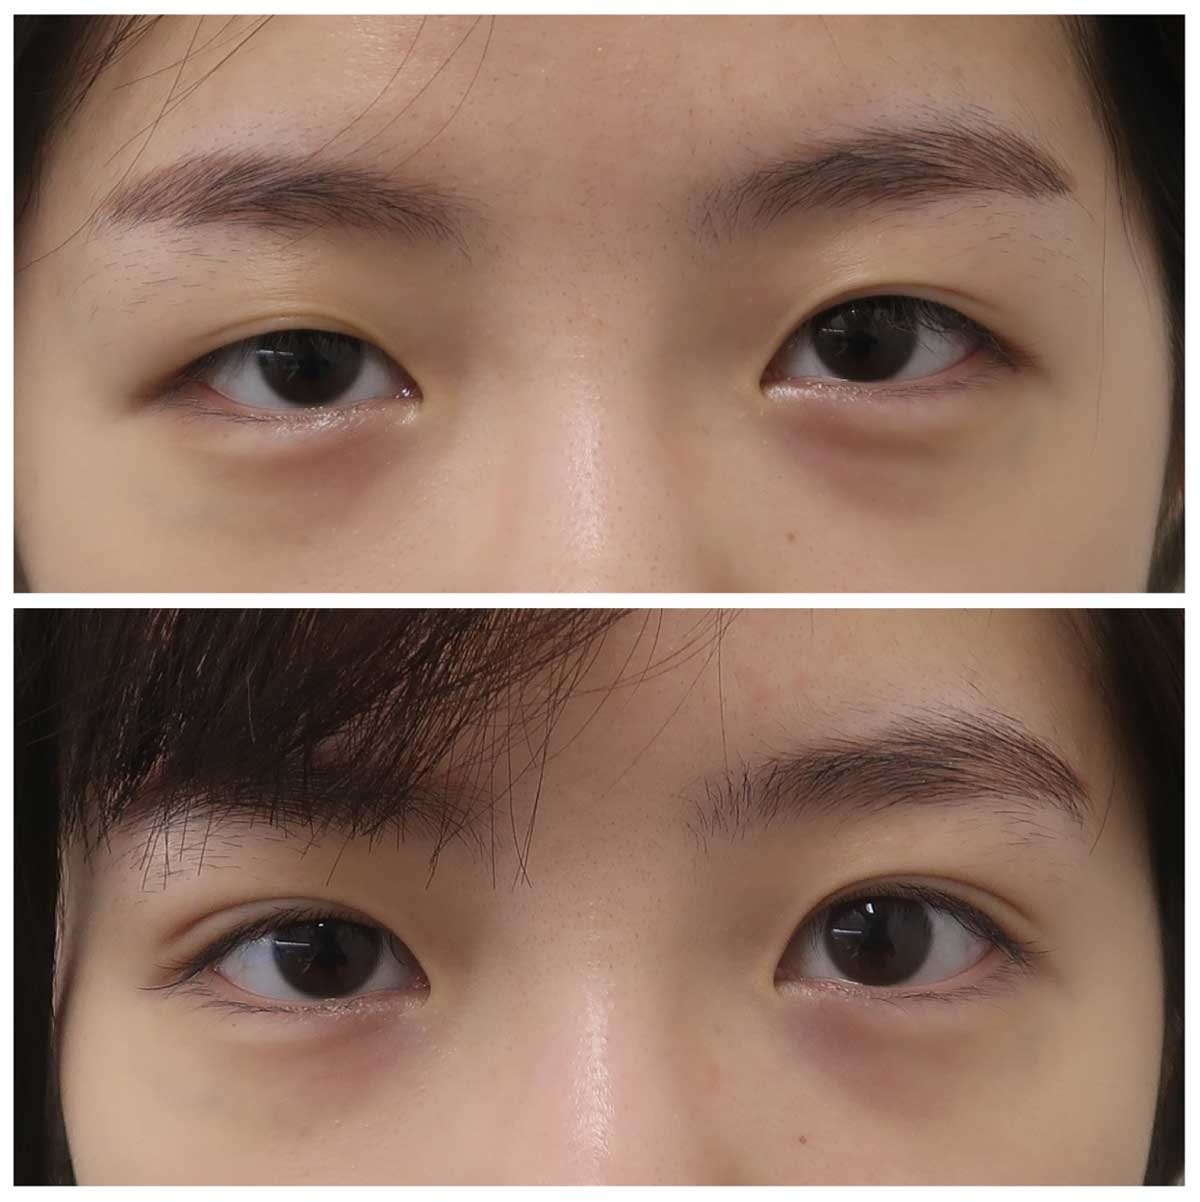 Double eyelid surgery gives noticeable results